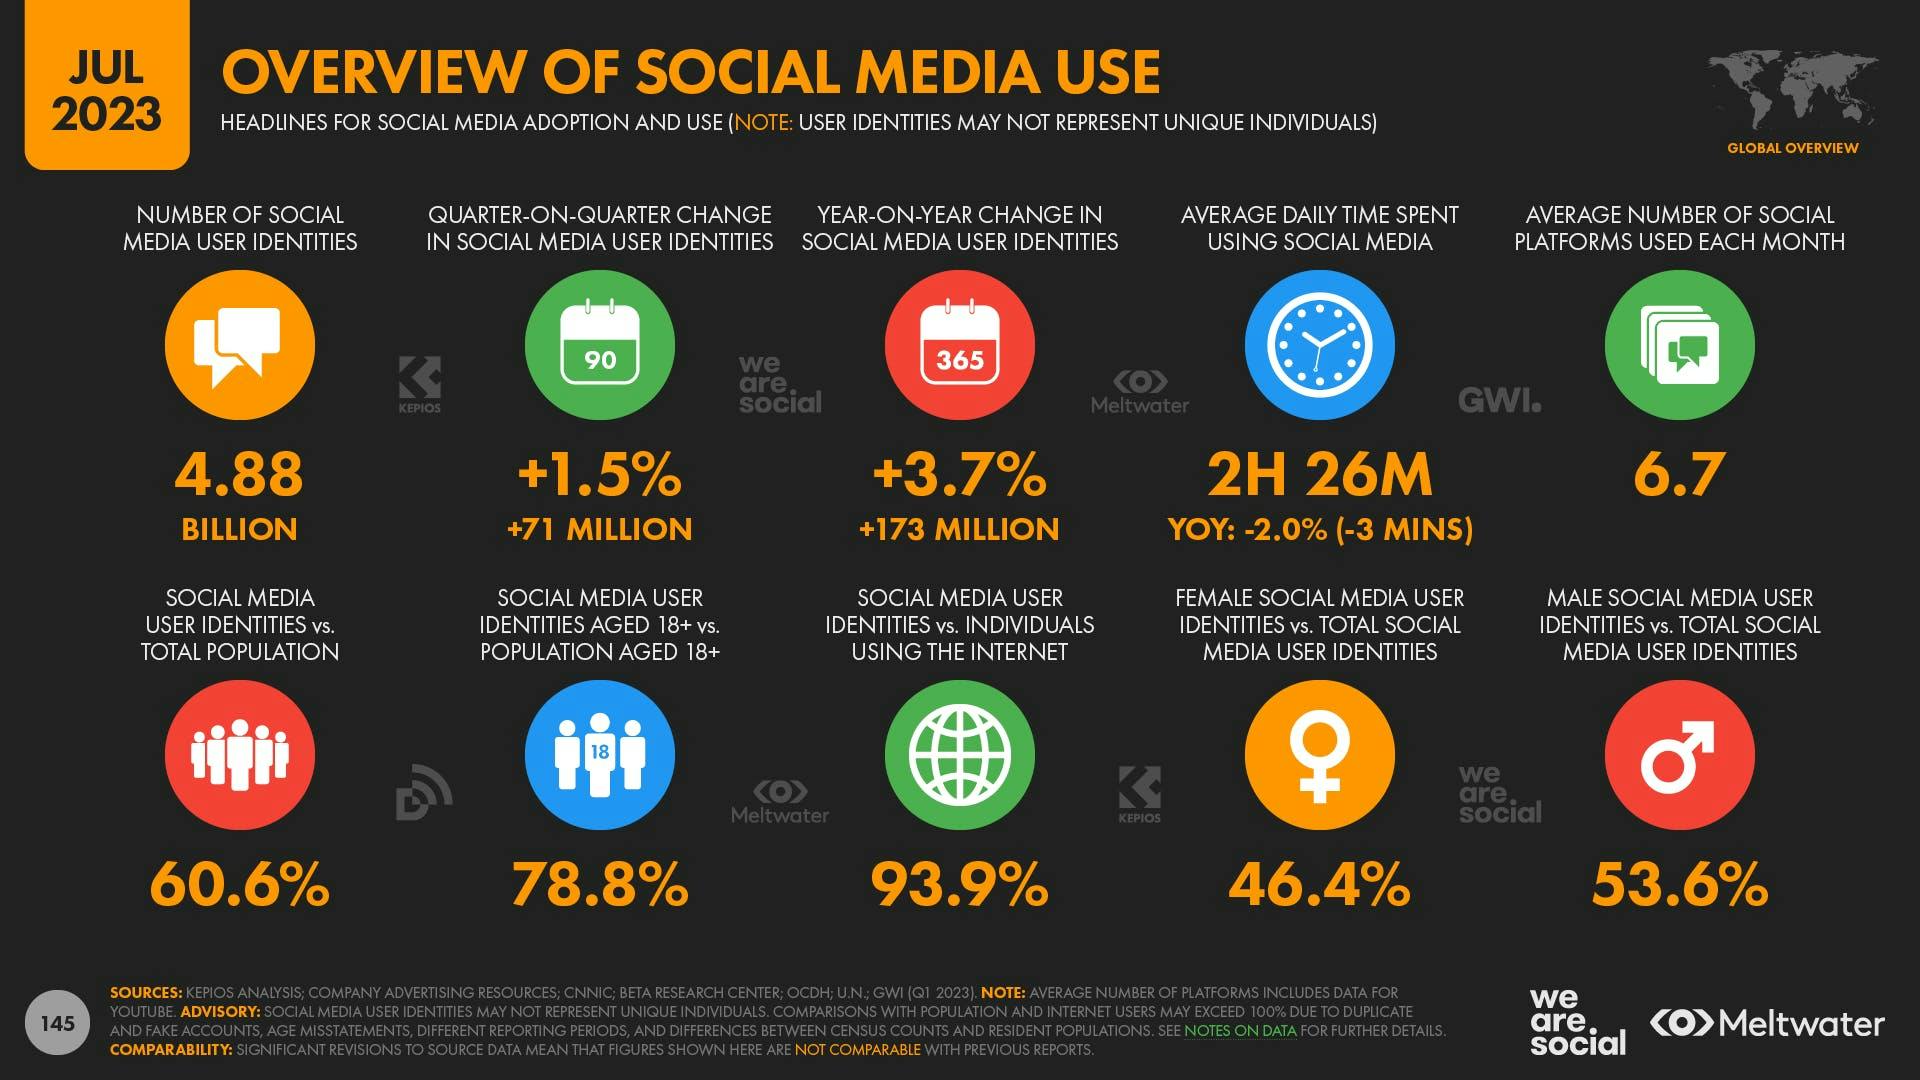 A slide showing an overview of social media use data, including the stat that there has been a 1.5% quarter-on-quarter increase of social media user identities. 